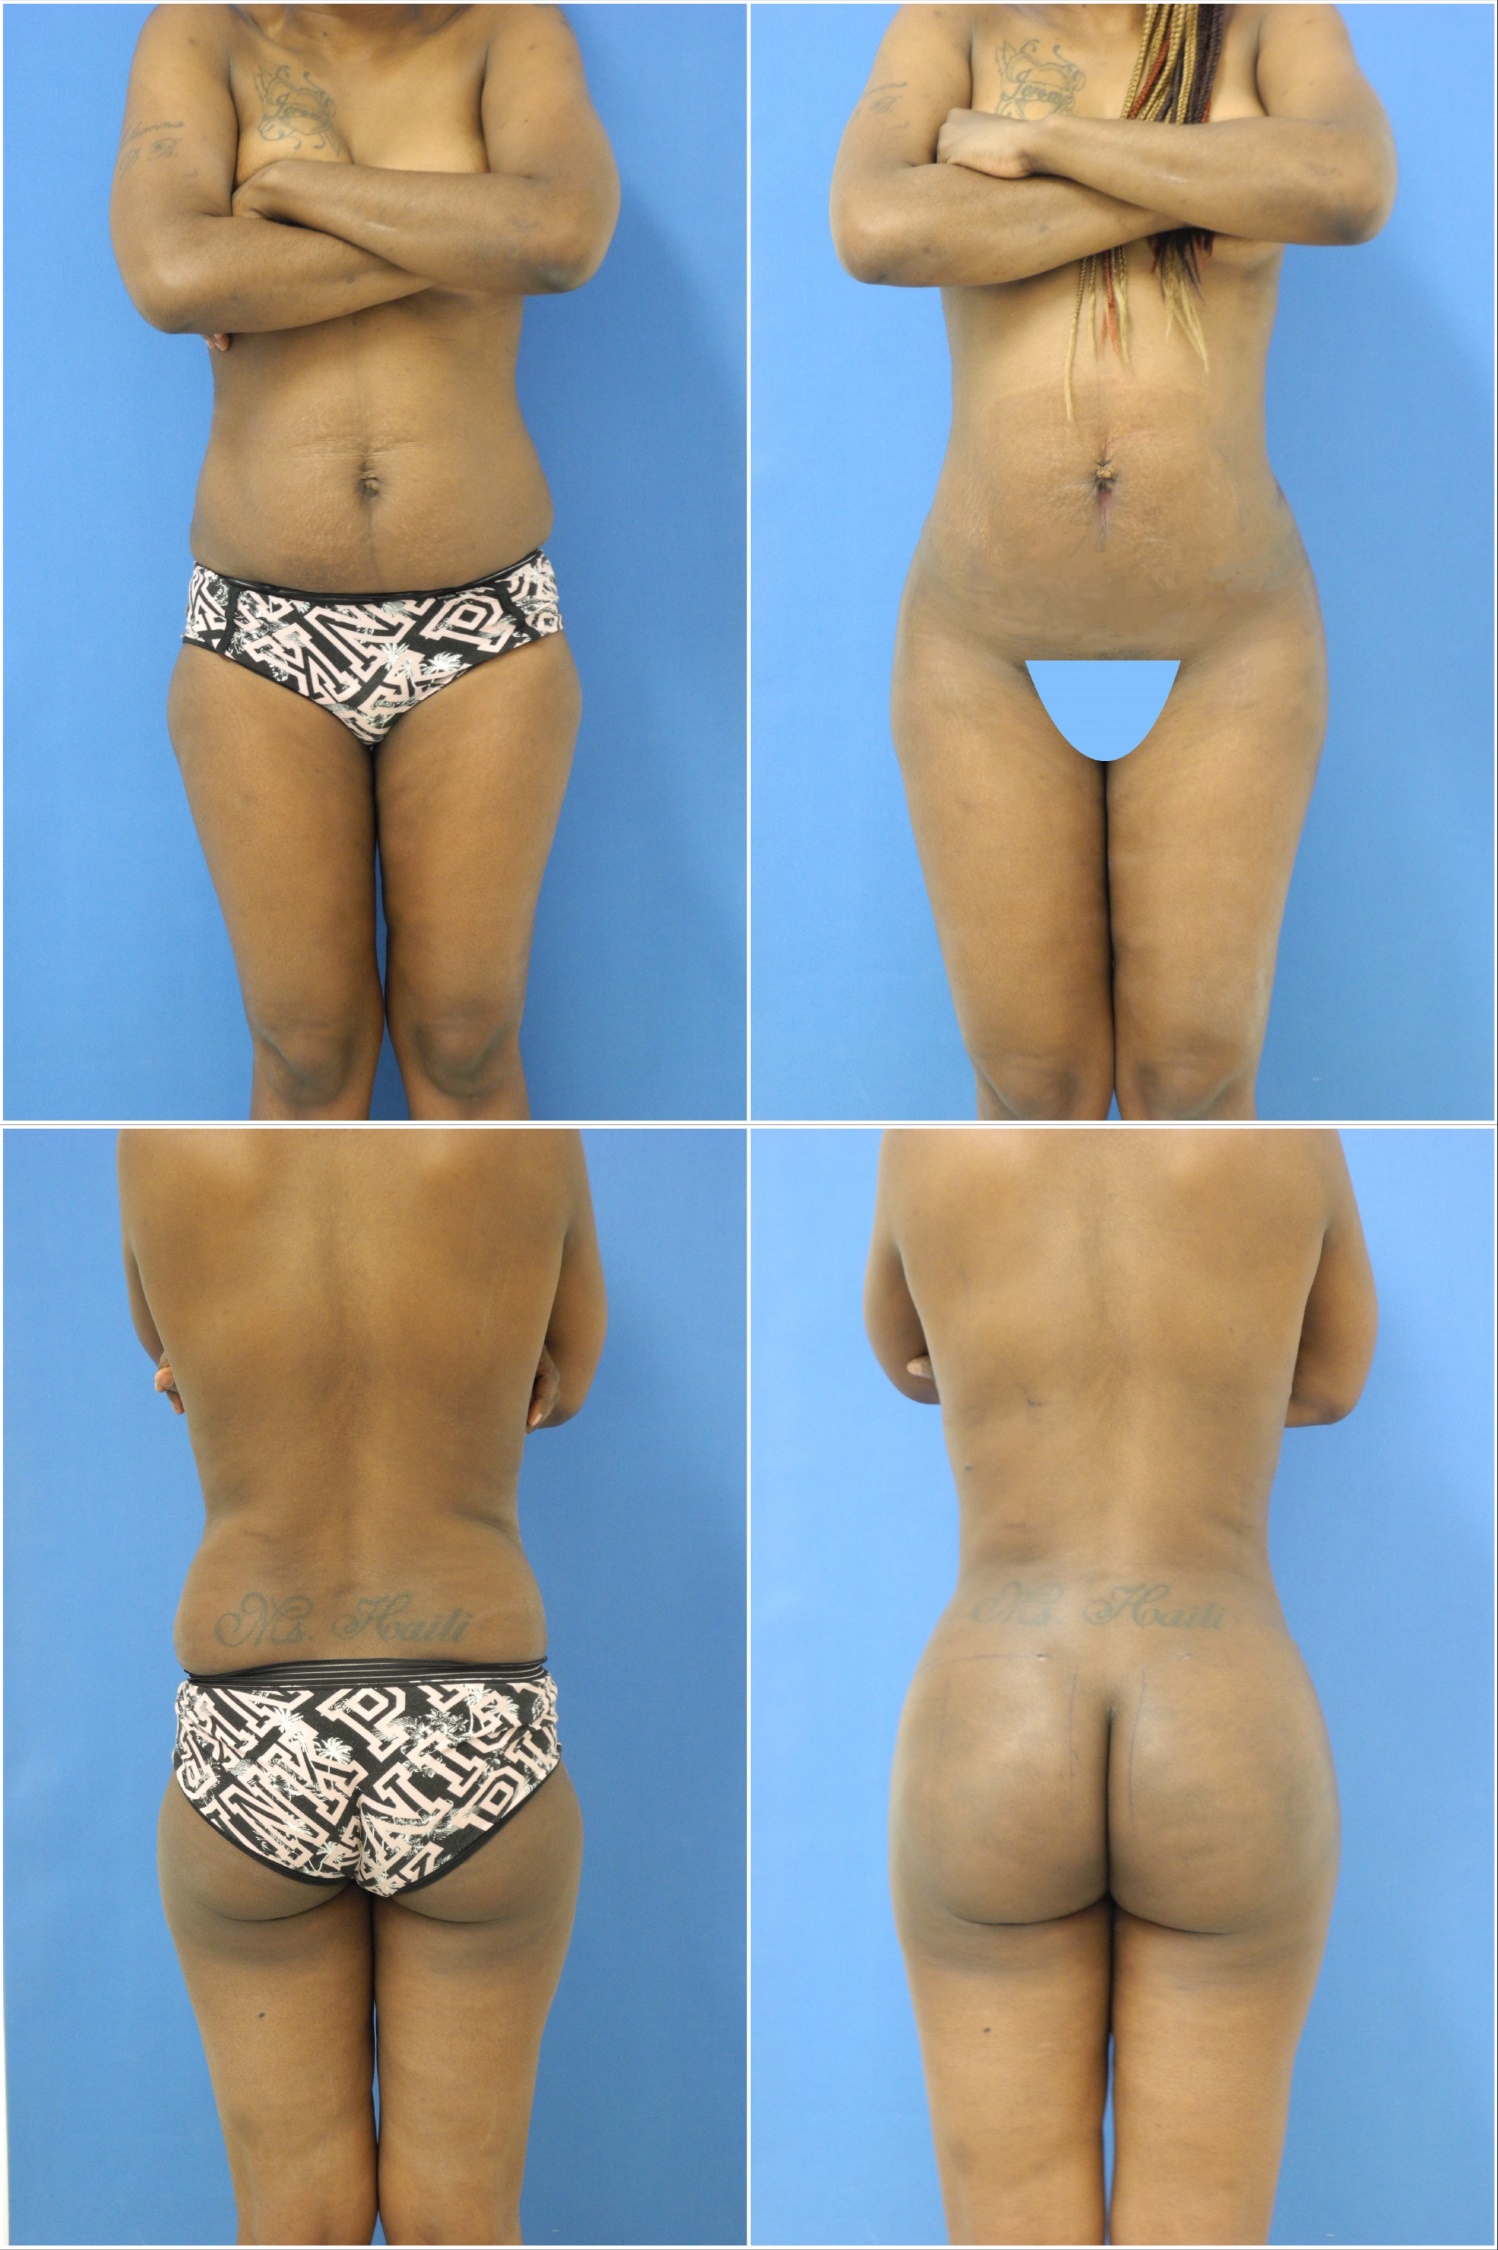 Liposculpture and Liposuction Before and After